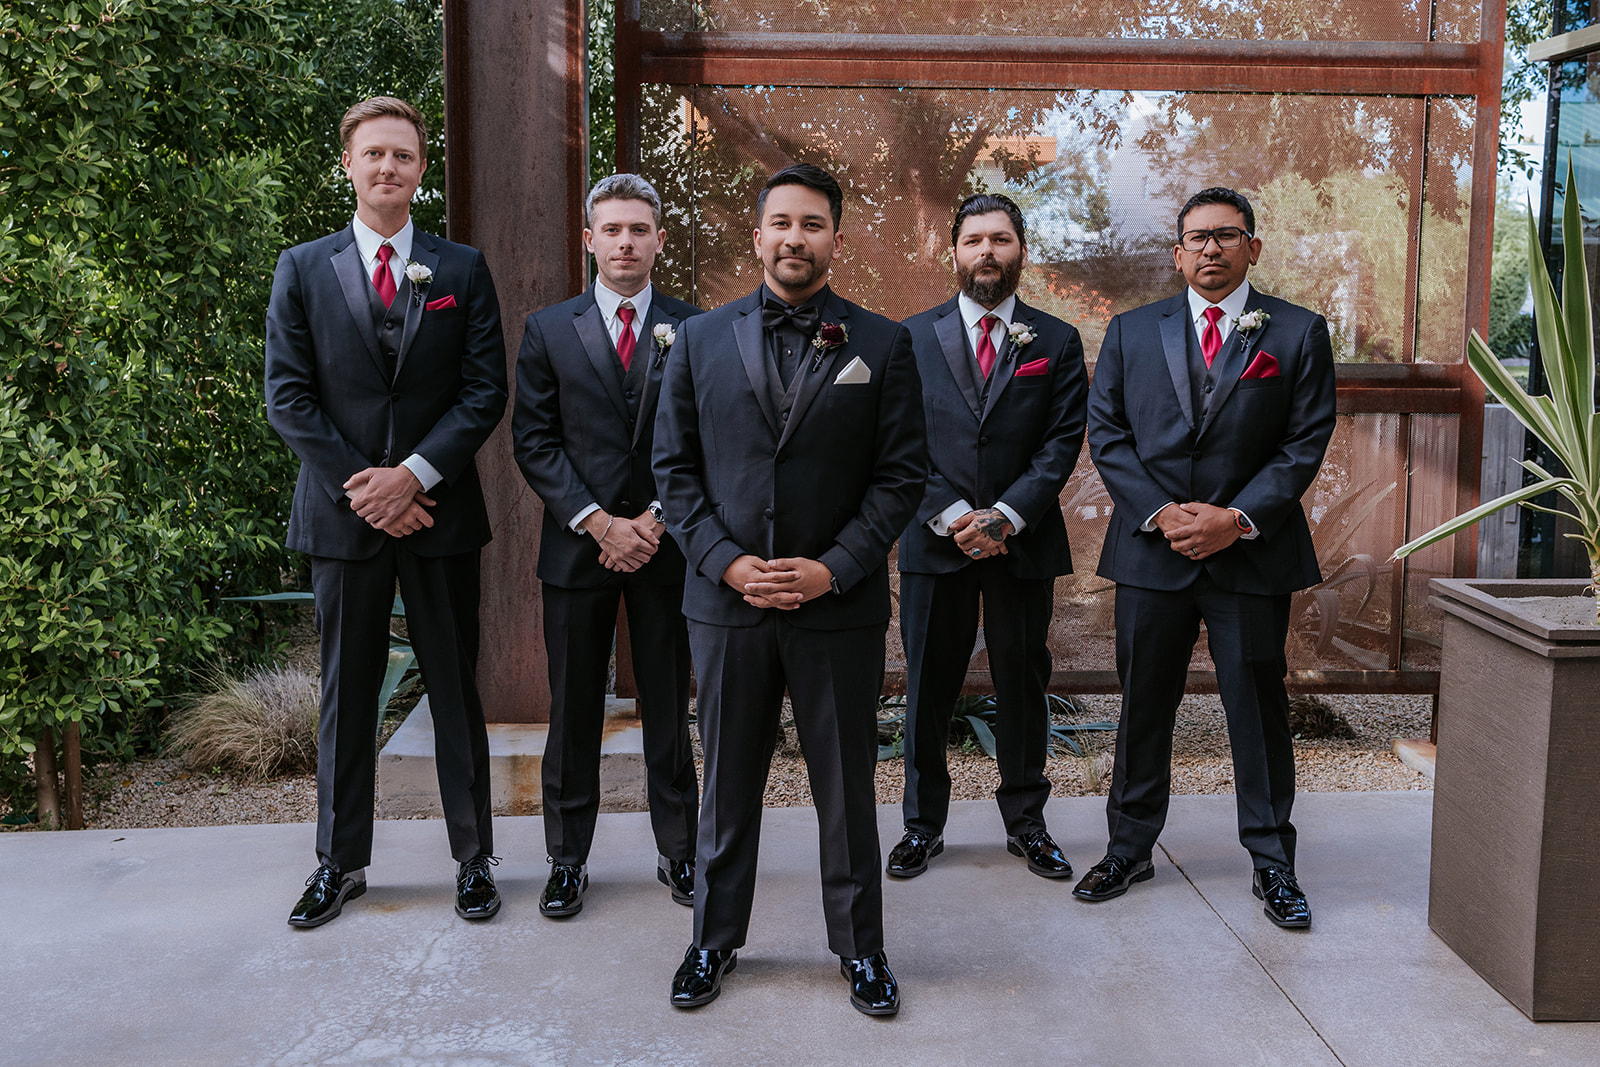 Groomsman posing for the camera with garden background